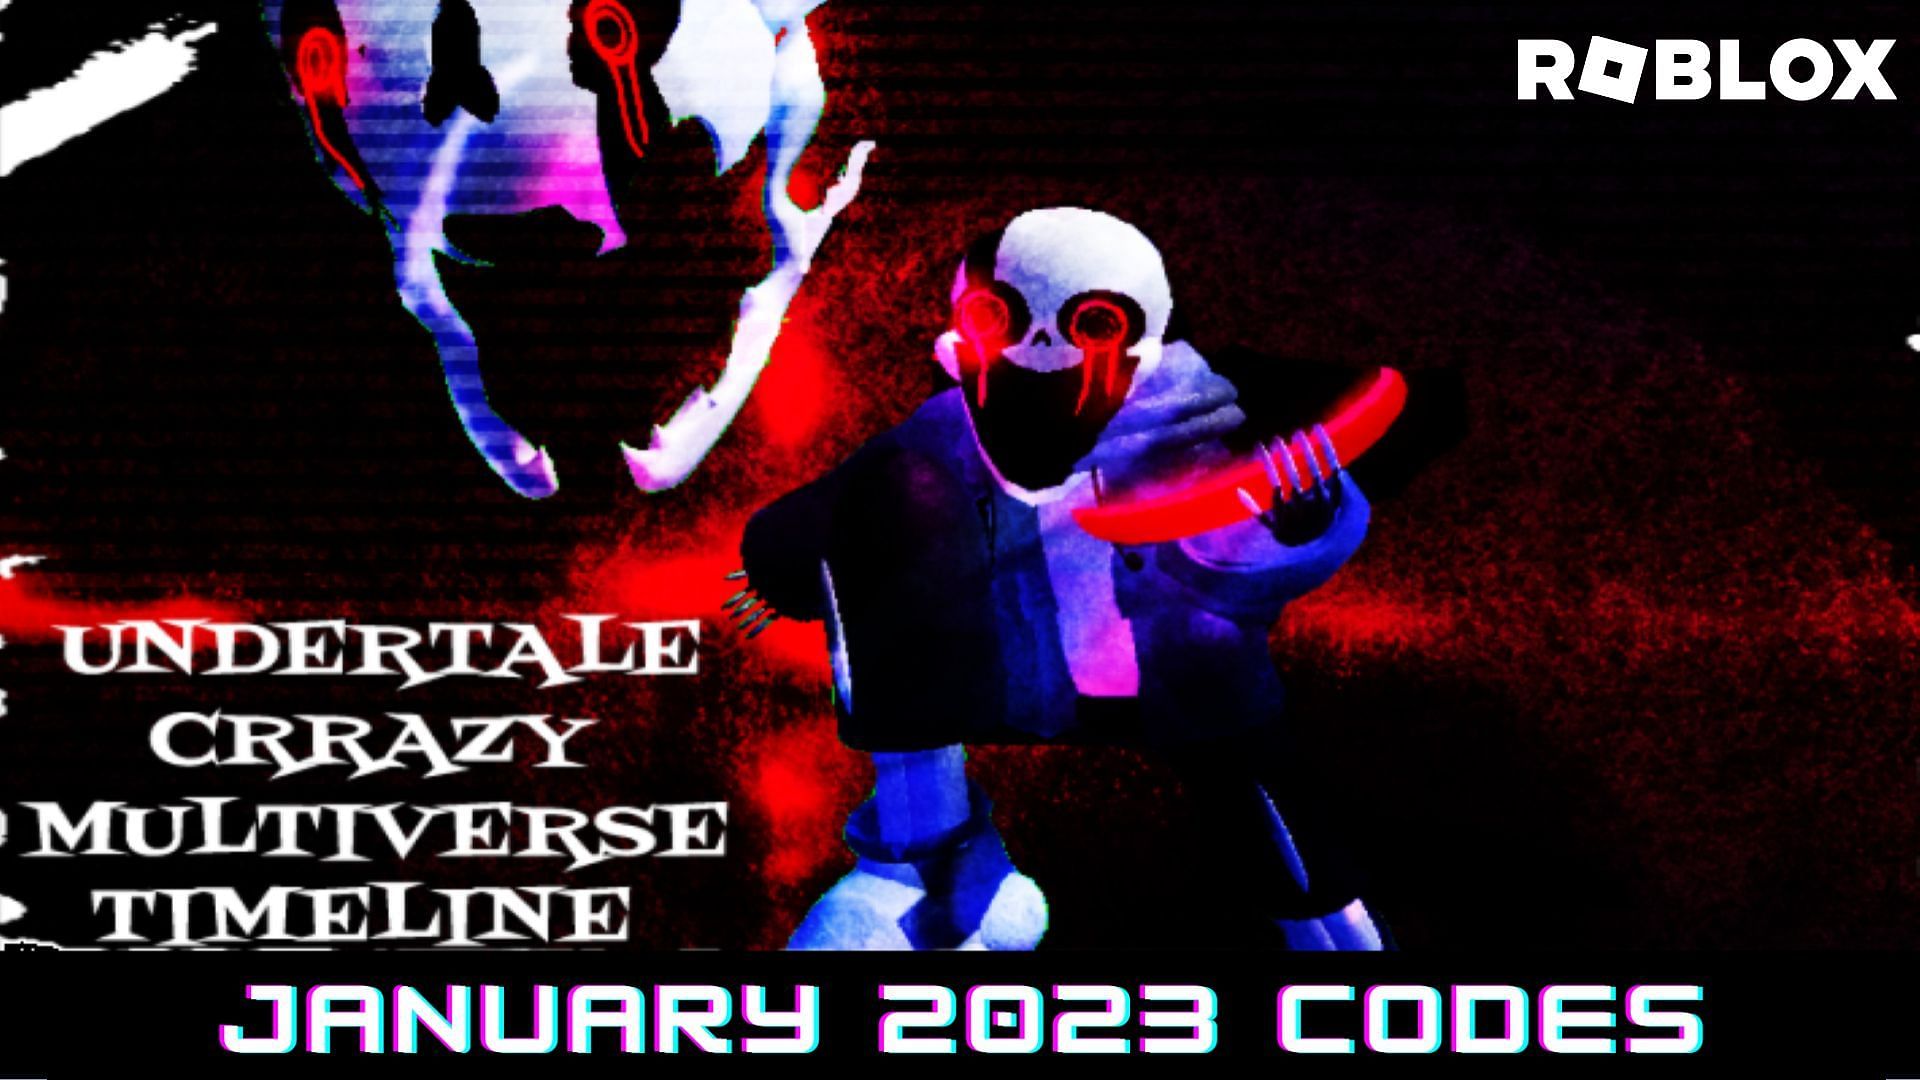 Roblox Undertale Crazy Multiverse Timeline Codes for January 2023